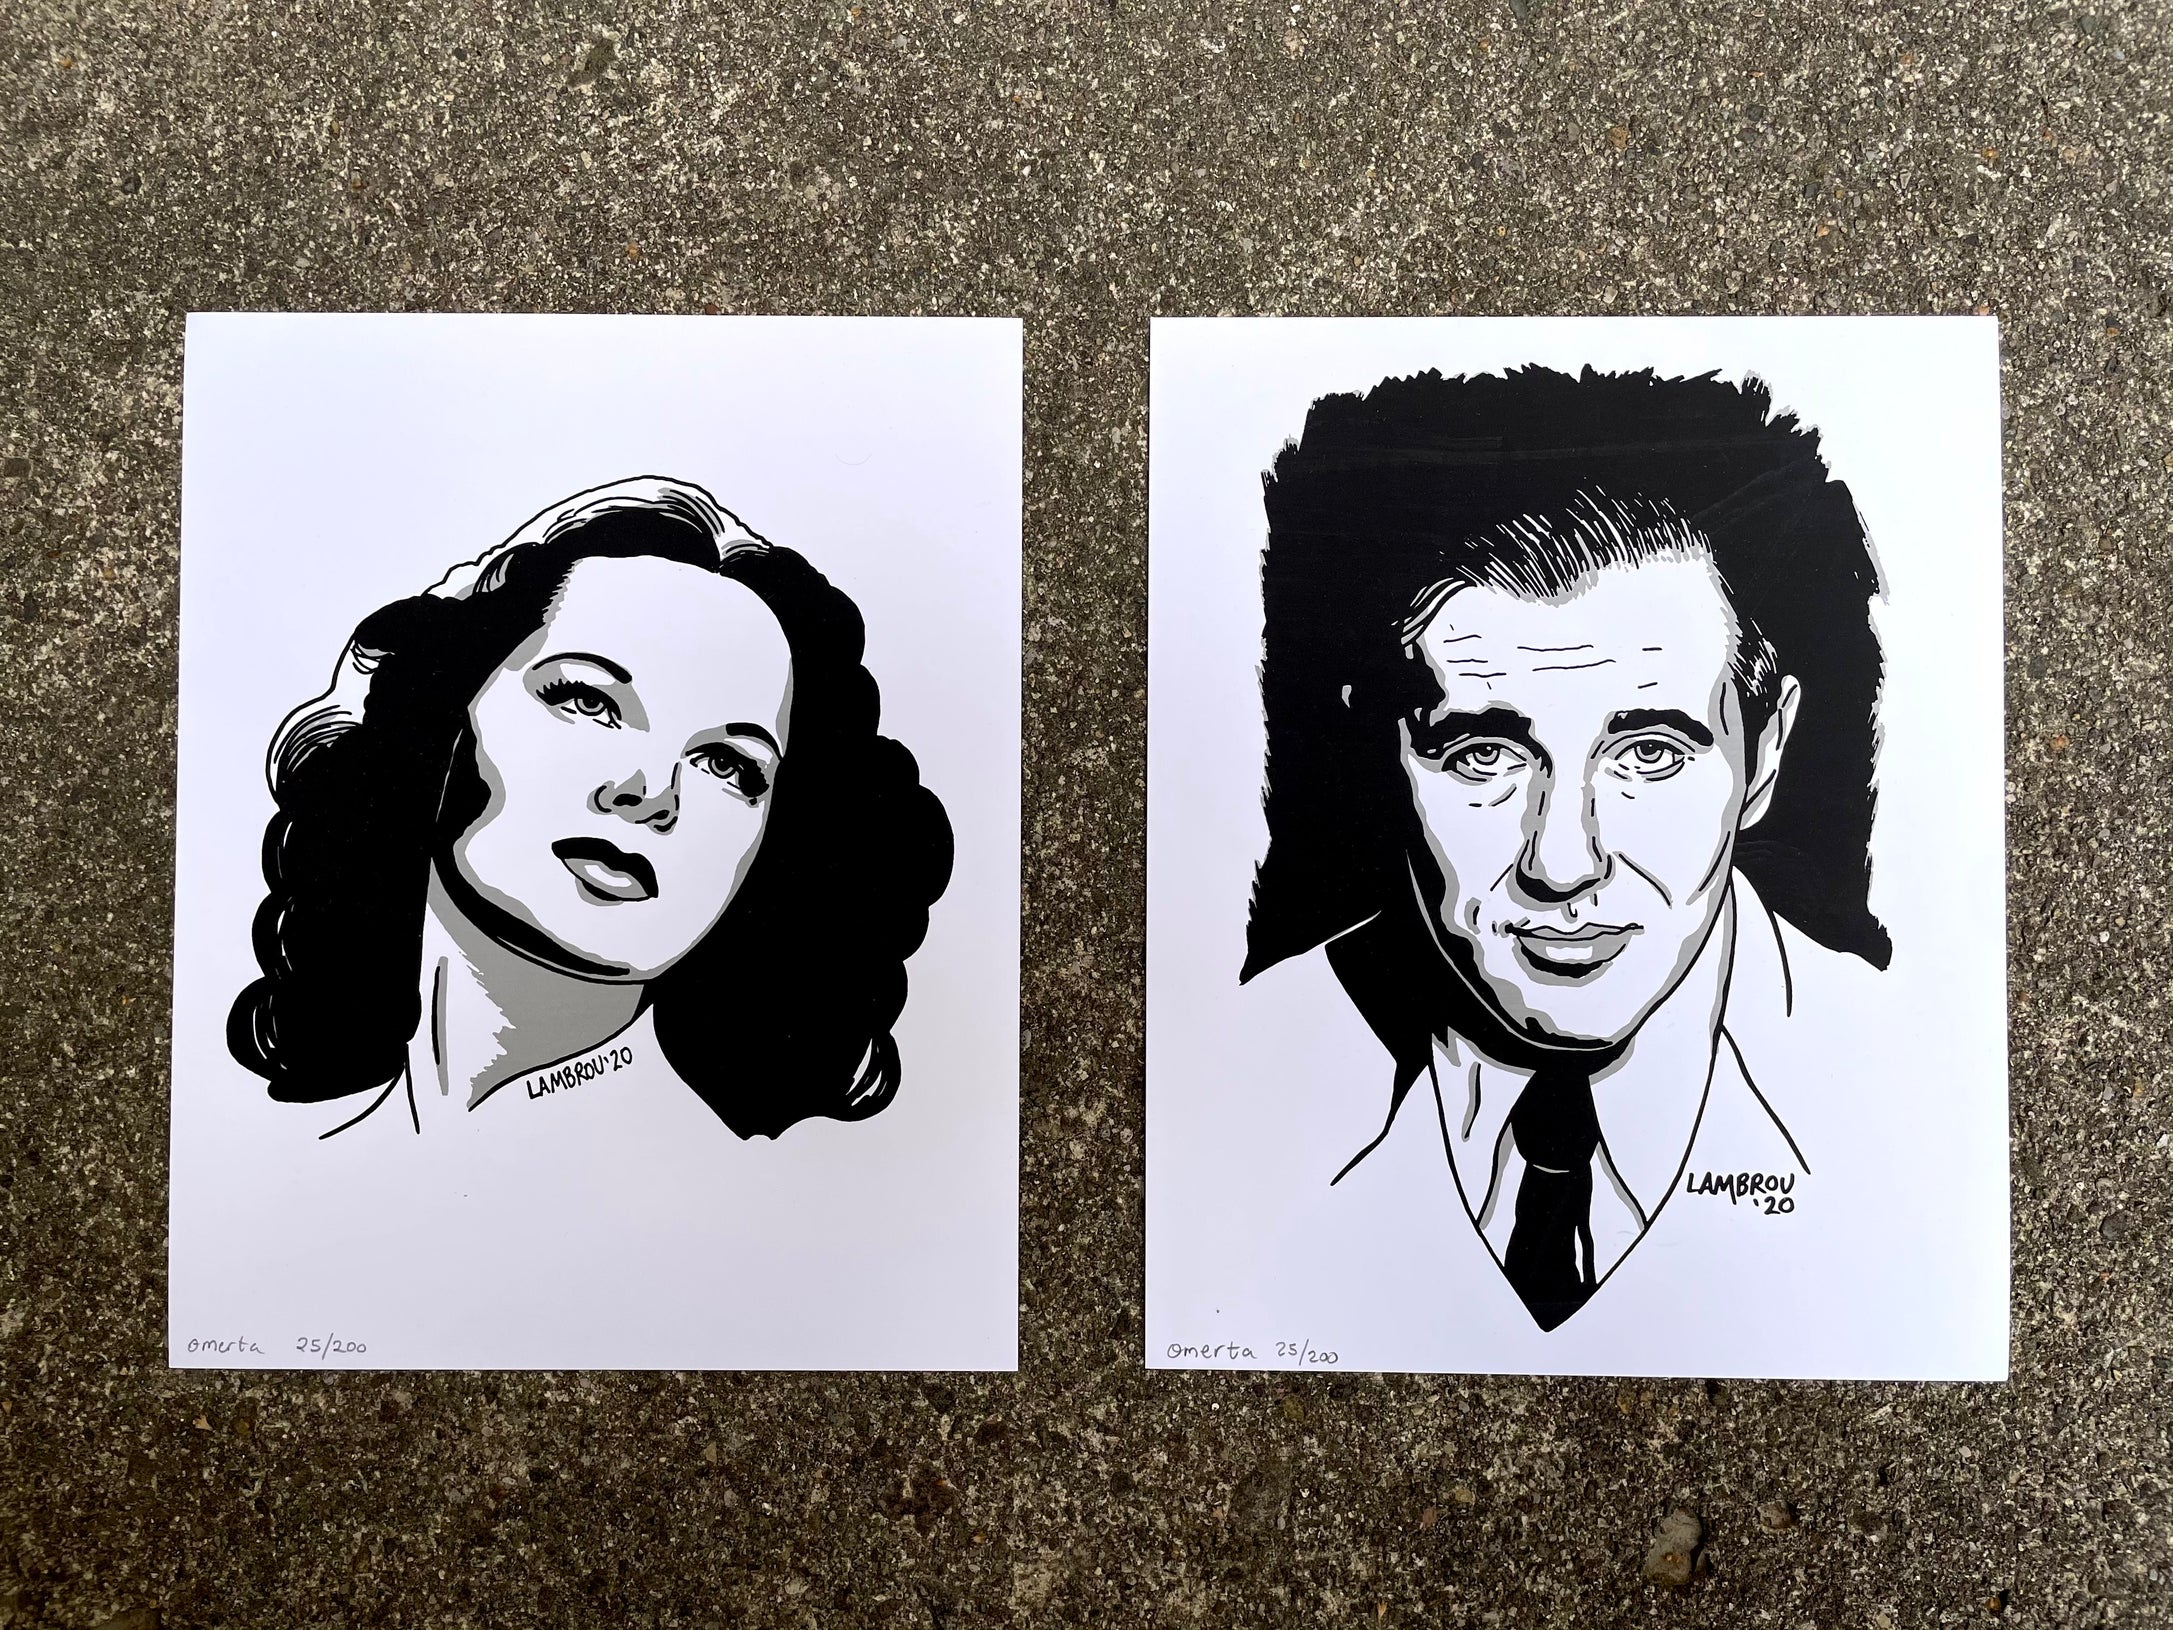 Bugsy Siegel x Virginia Hill Limited Prints of 200